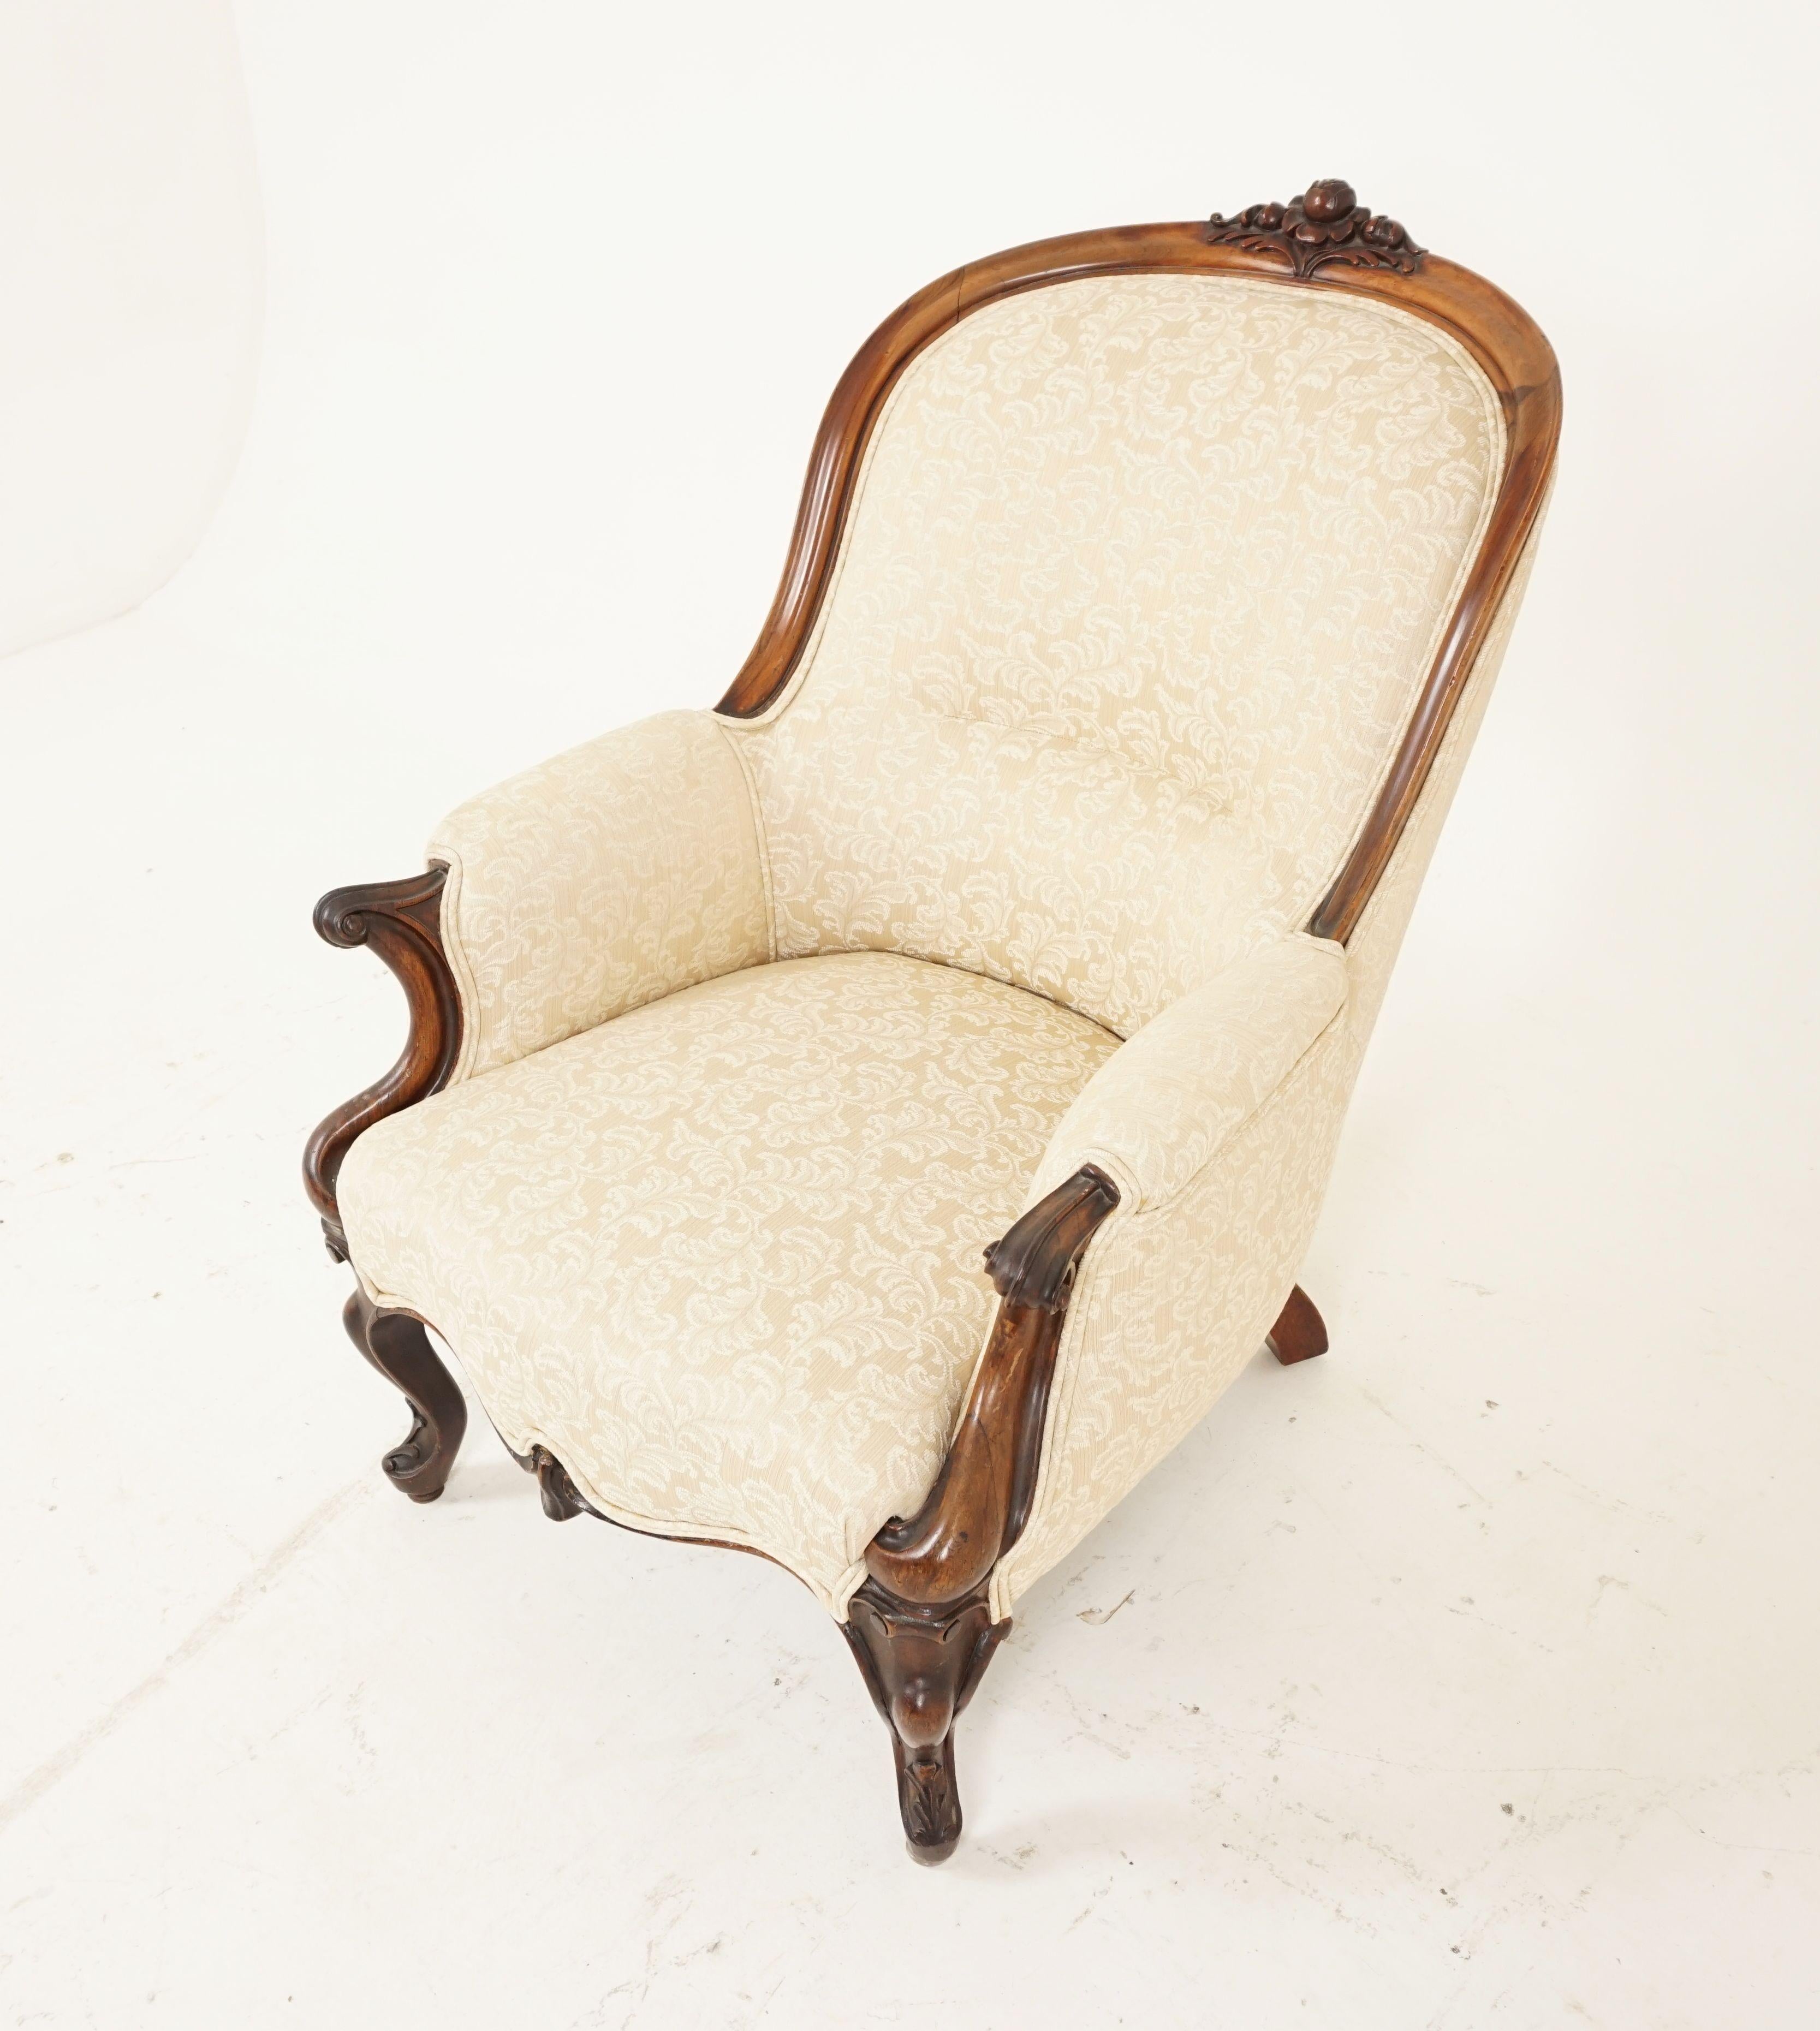 Hand-Crafted Antique Victorian Chair, Mahogany Framed Spoon Back Chair, Scotland 1880, B2083